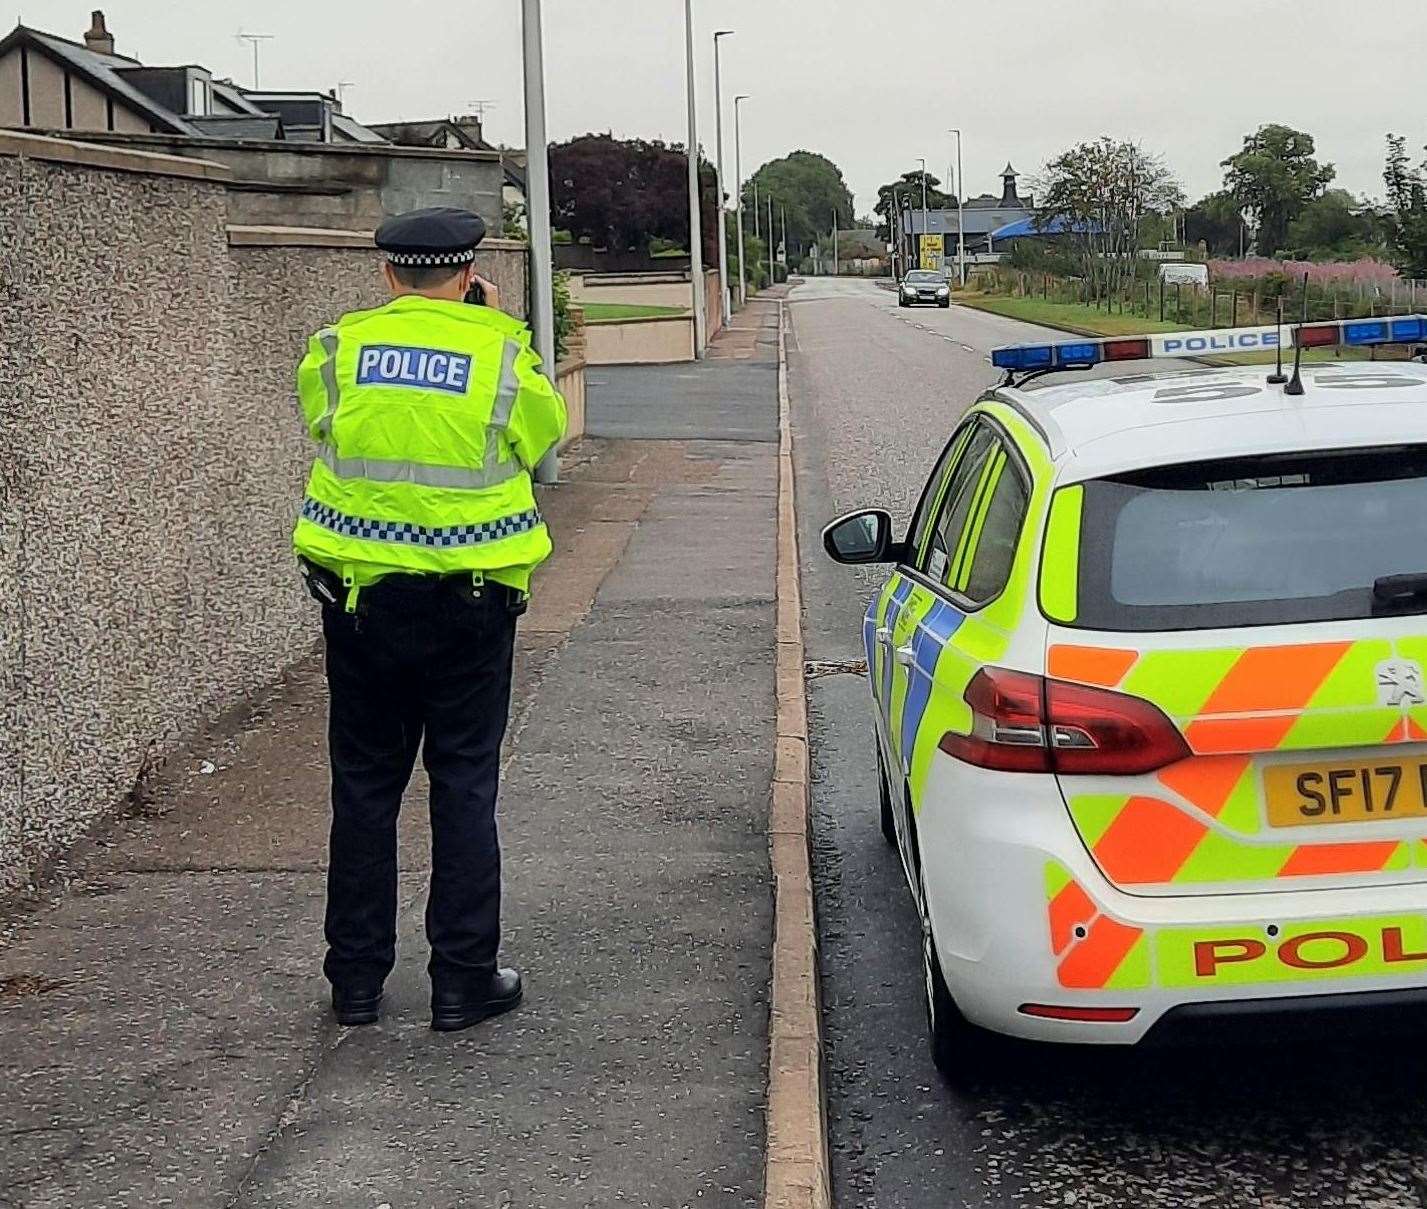 Patrols have been undertaken in Elgin to deal with anti-social driving